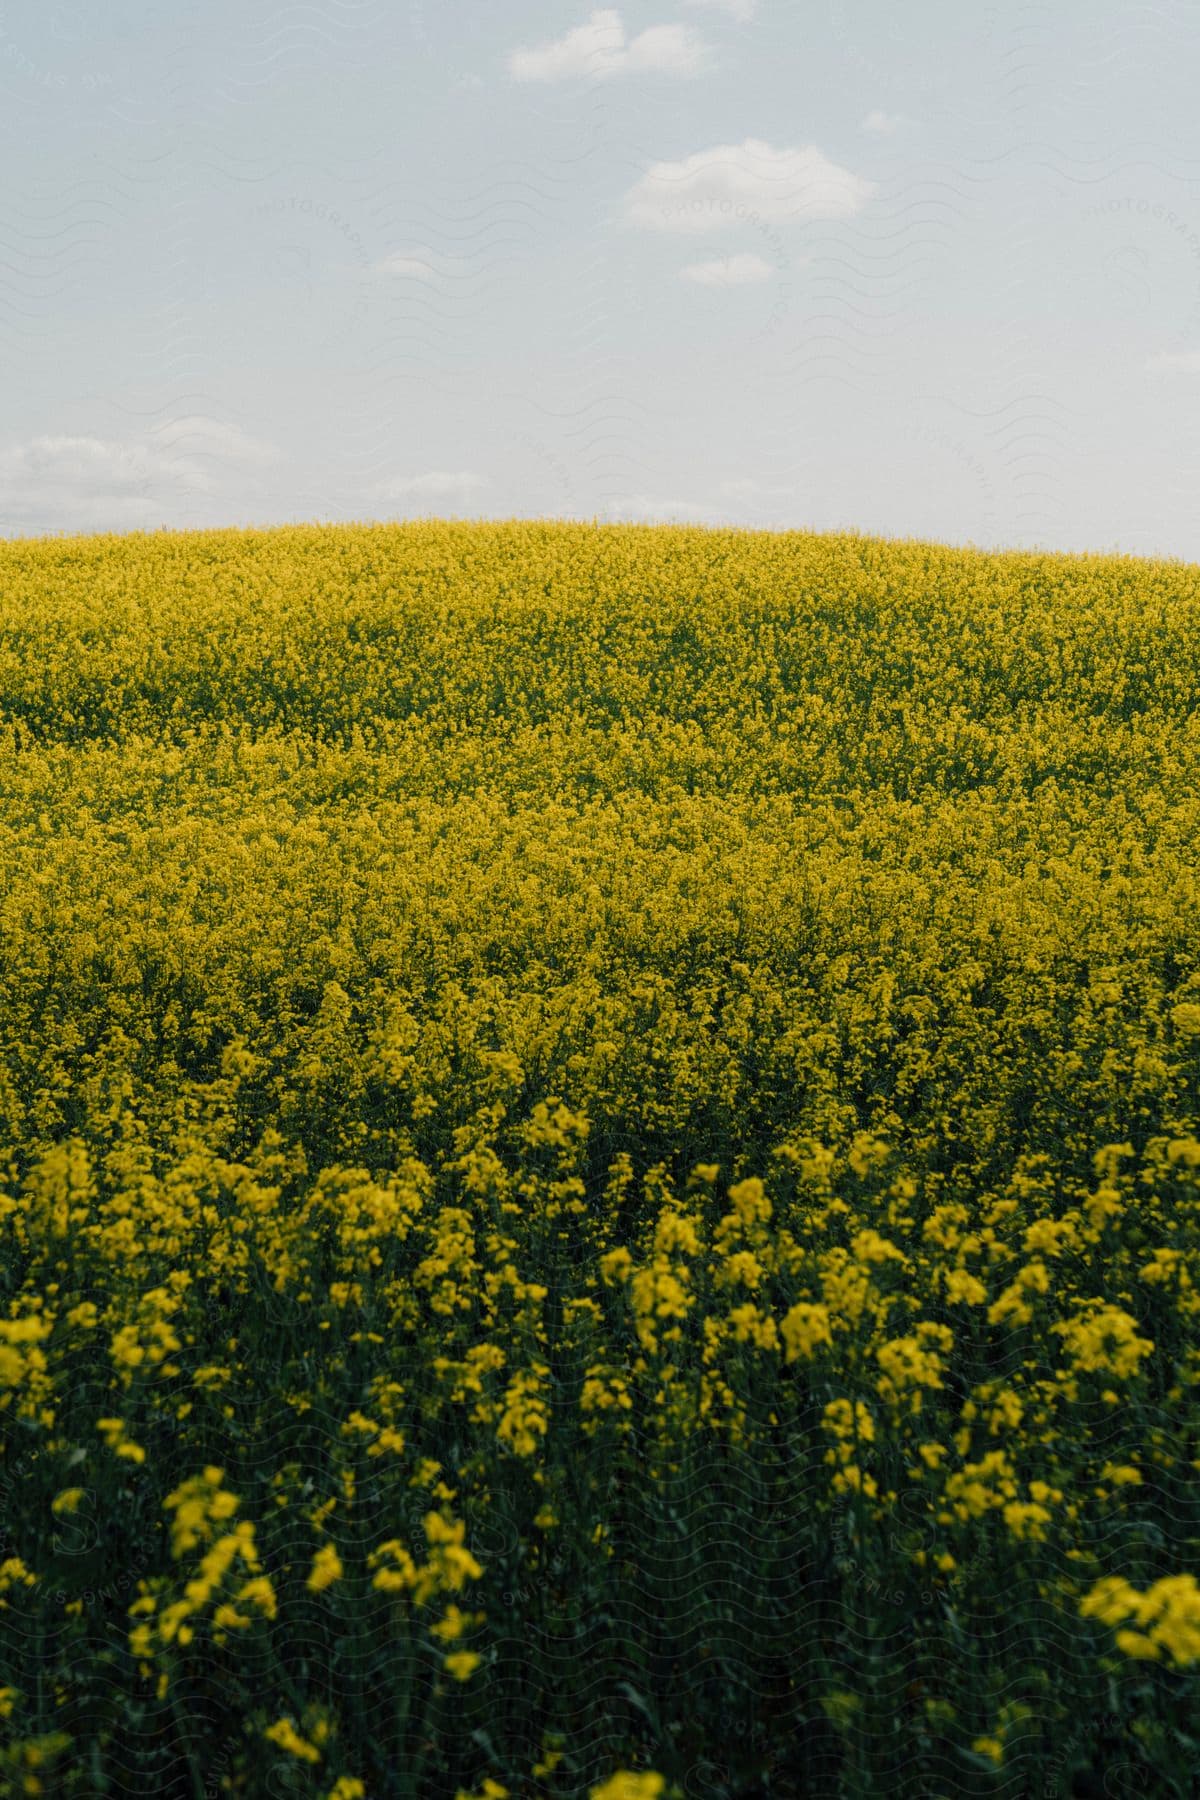 A sea of yellow blooms dances under a bright blue sky with fluffy clouds.